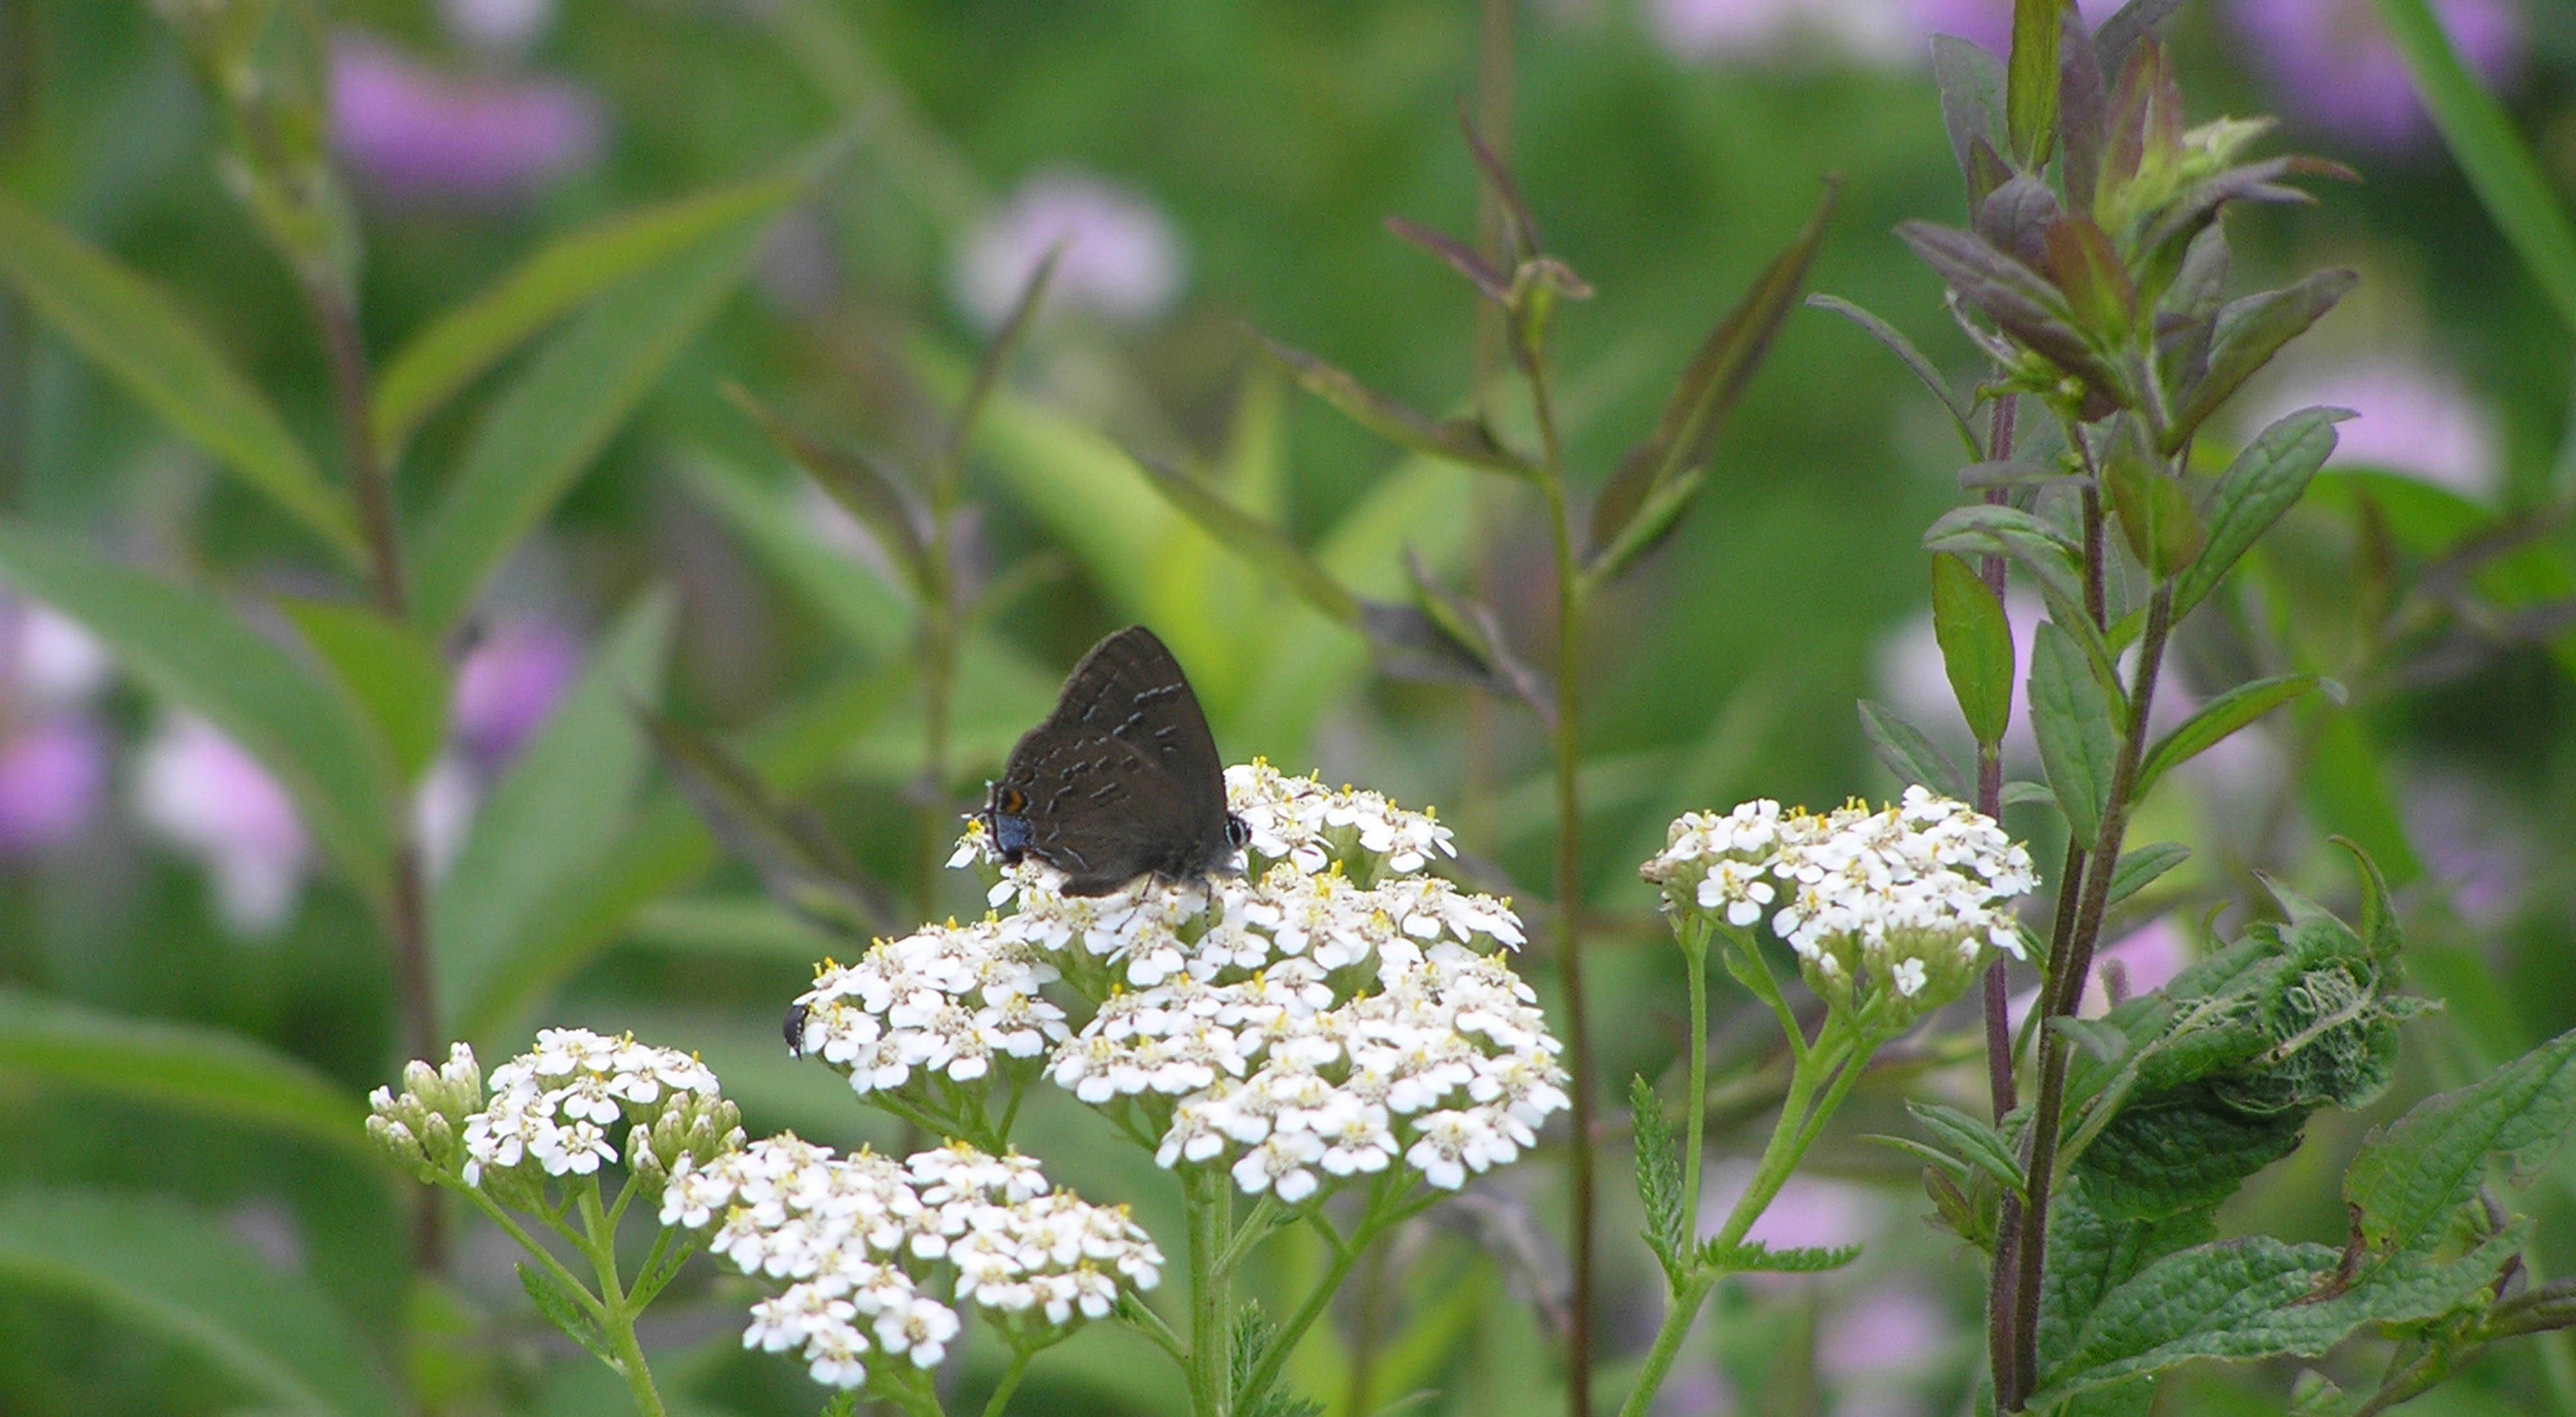 A black butterfly perches on a cluster of white flower blossoms.